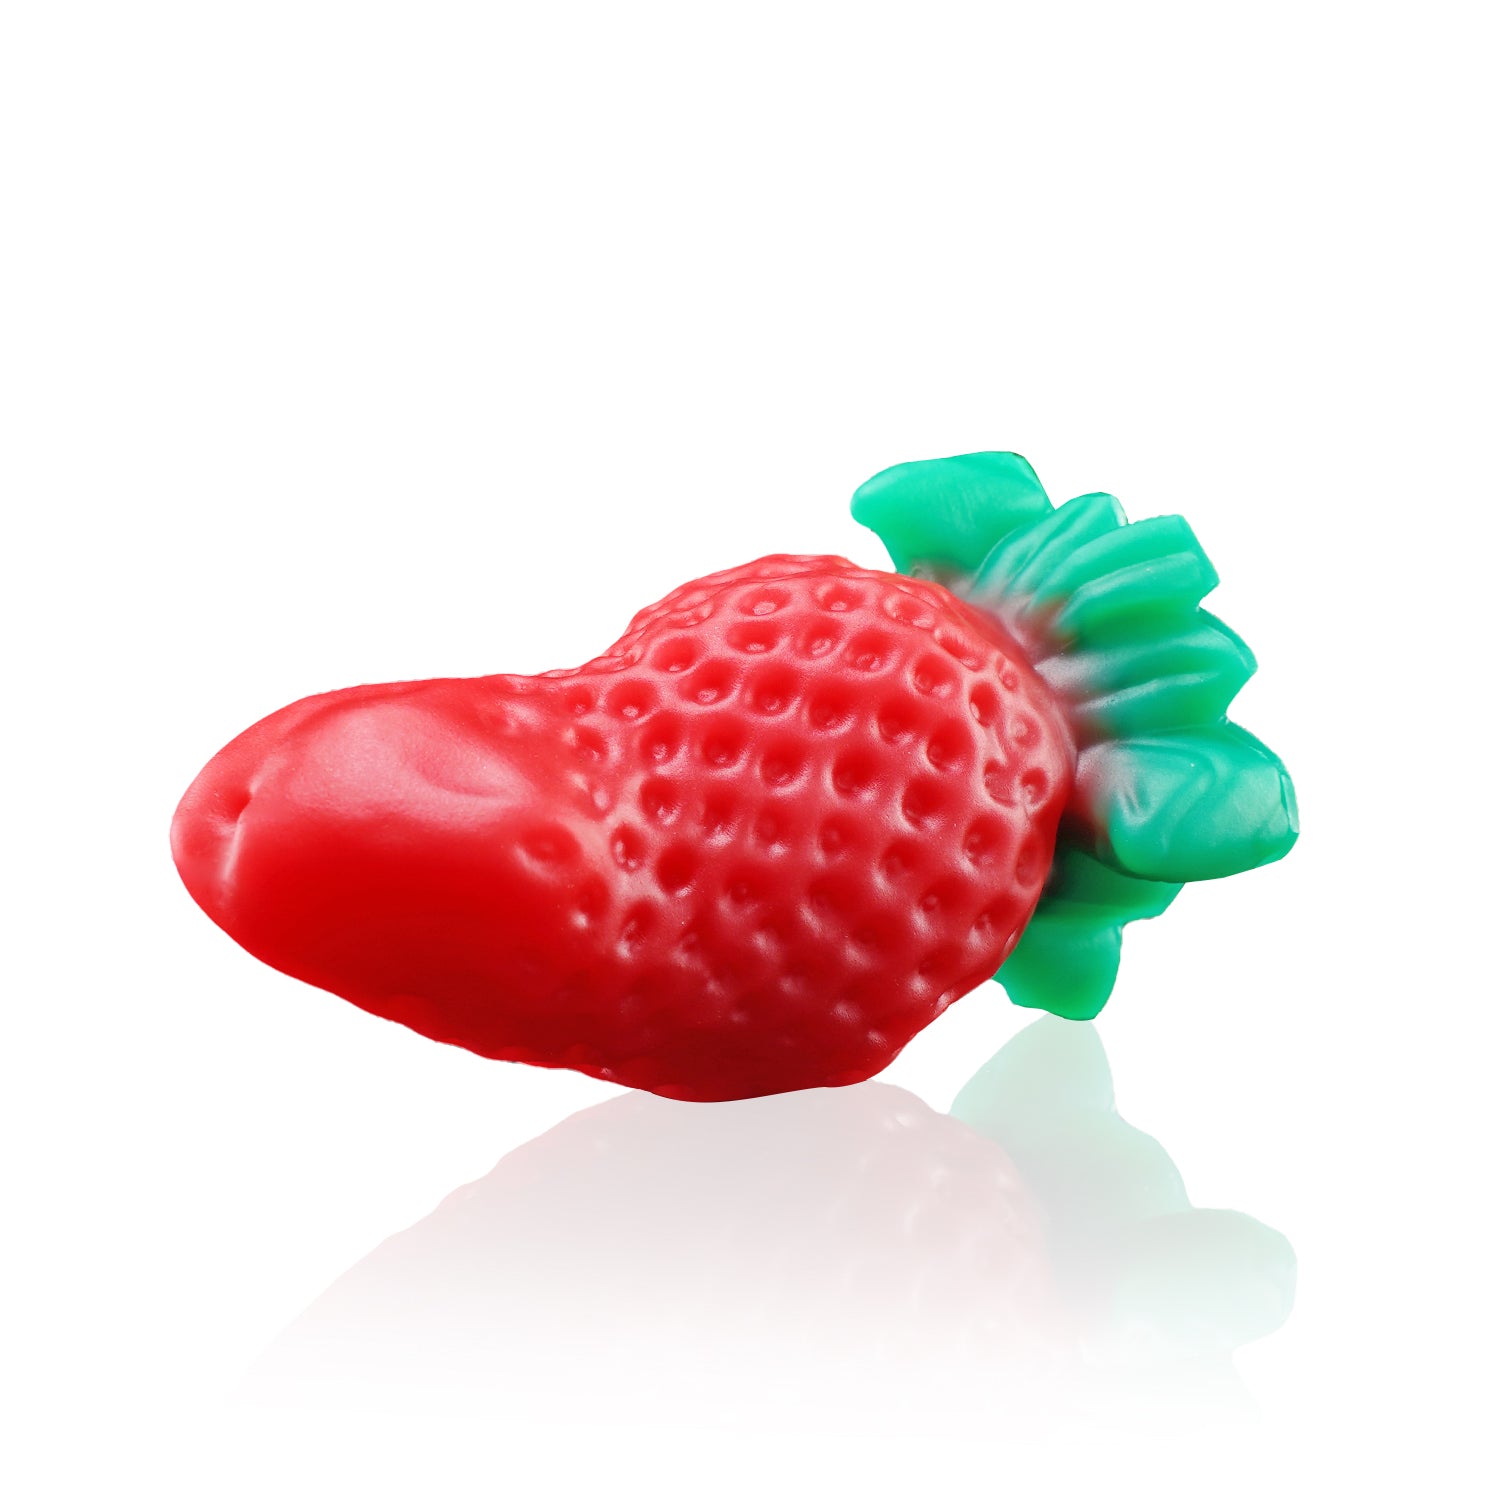 Nothosaur BERRYBLOOM-Fantasy Gode-Fraise Silicone Butt Plug-Insertable Outdoor Wearable Gode